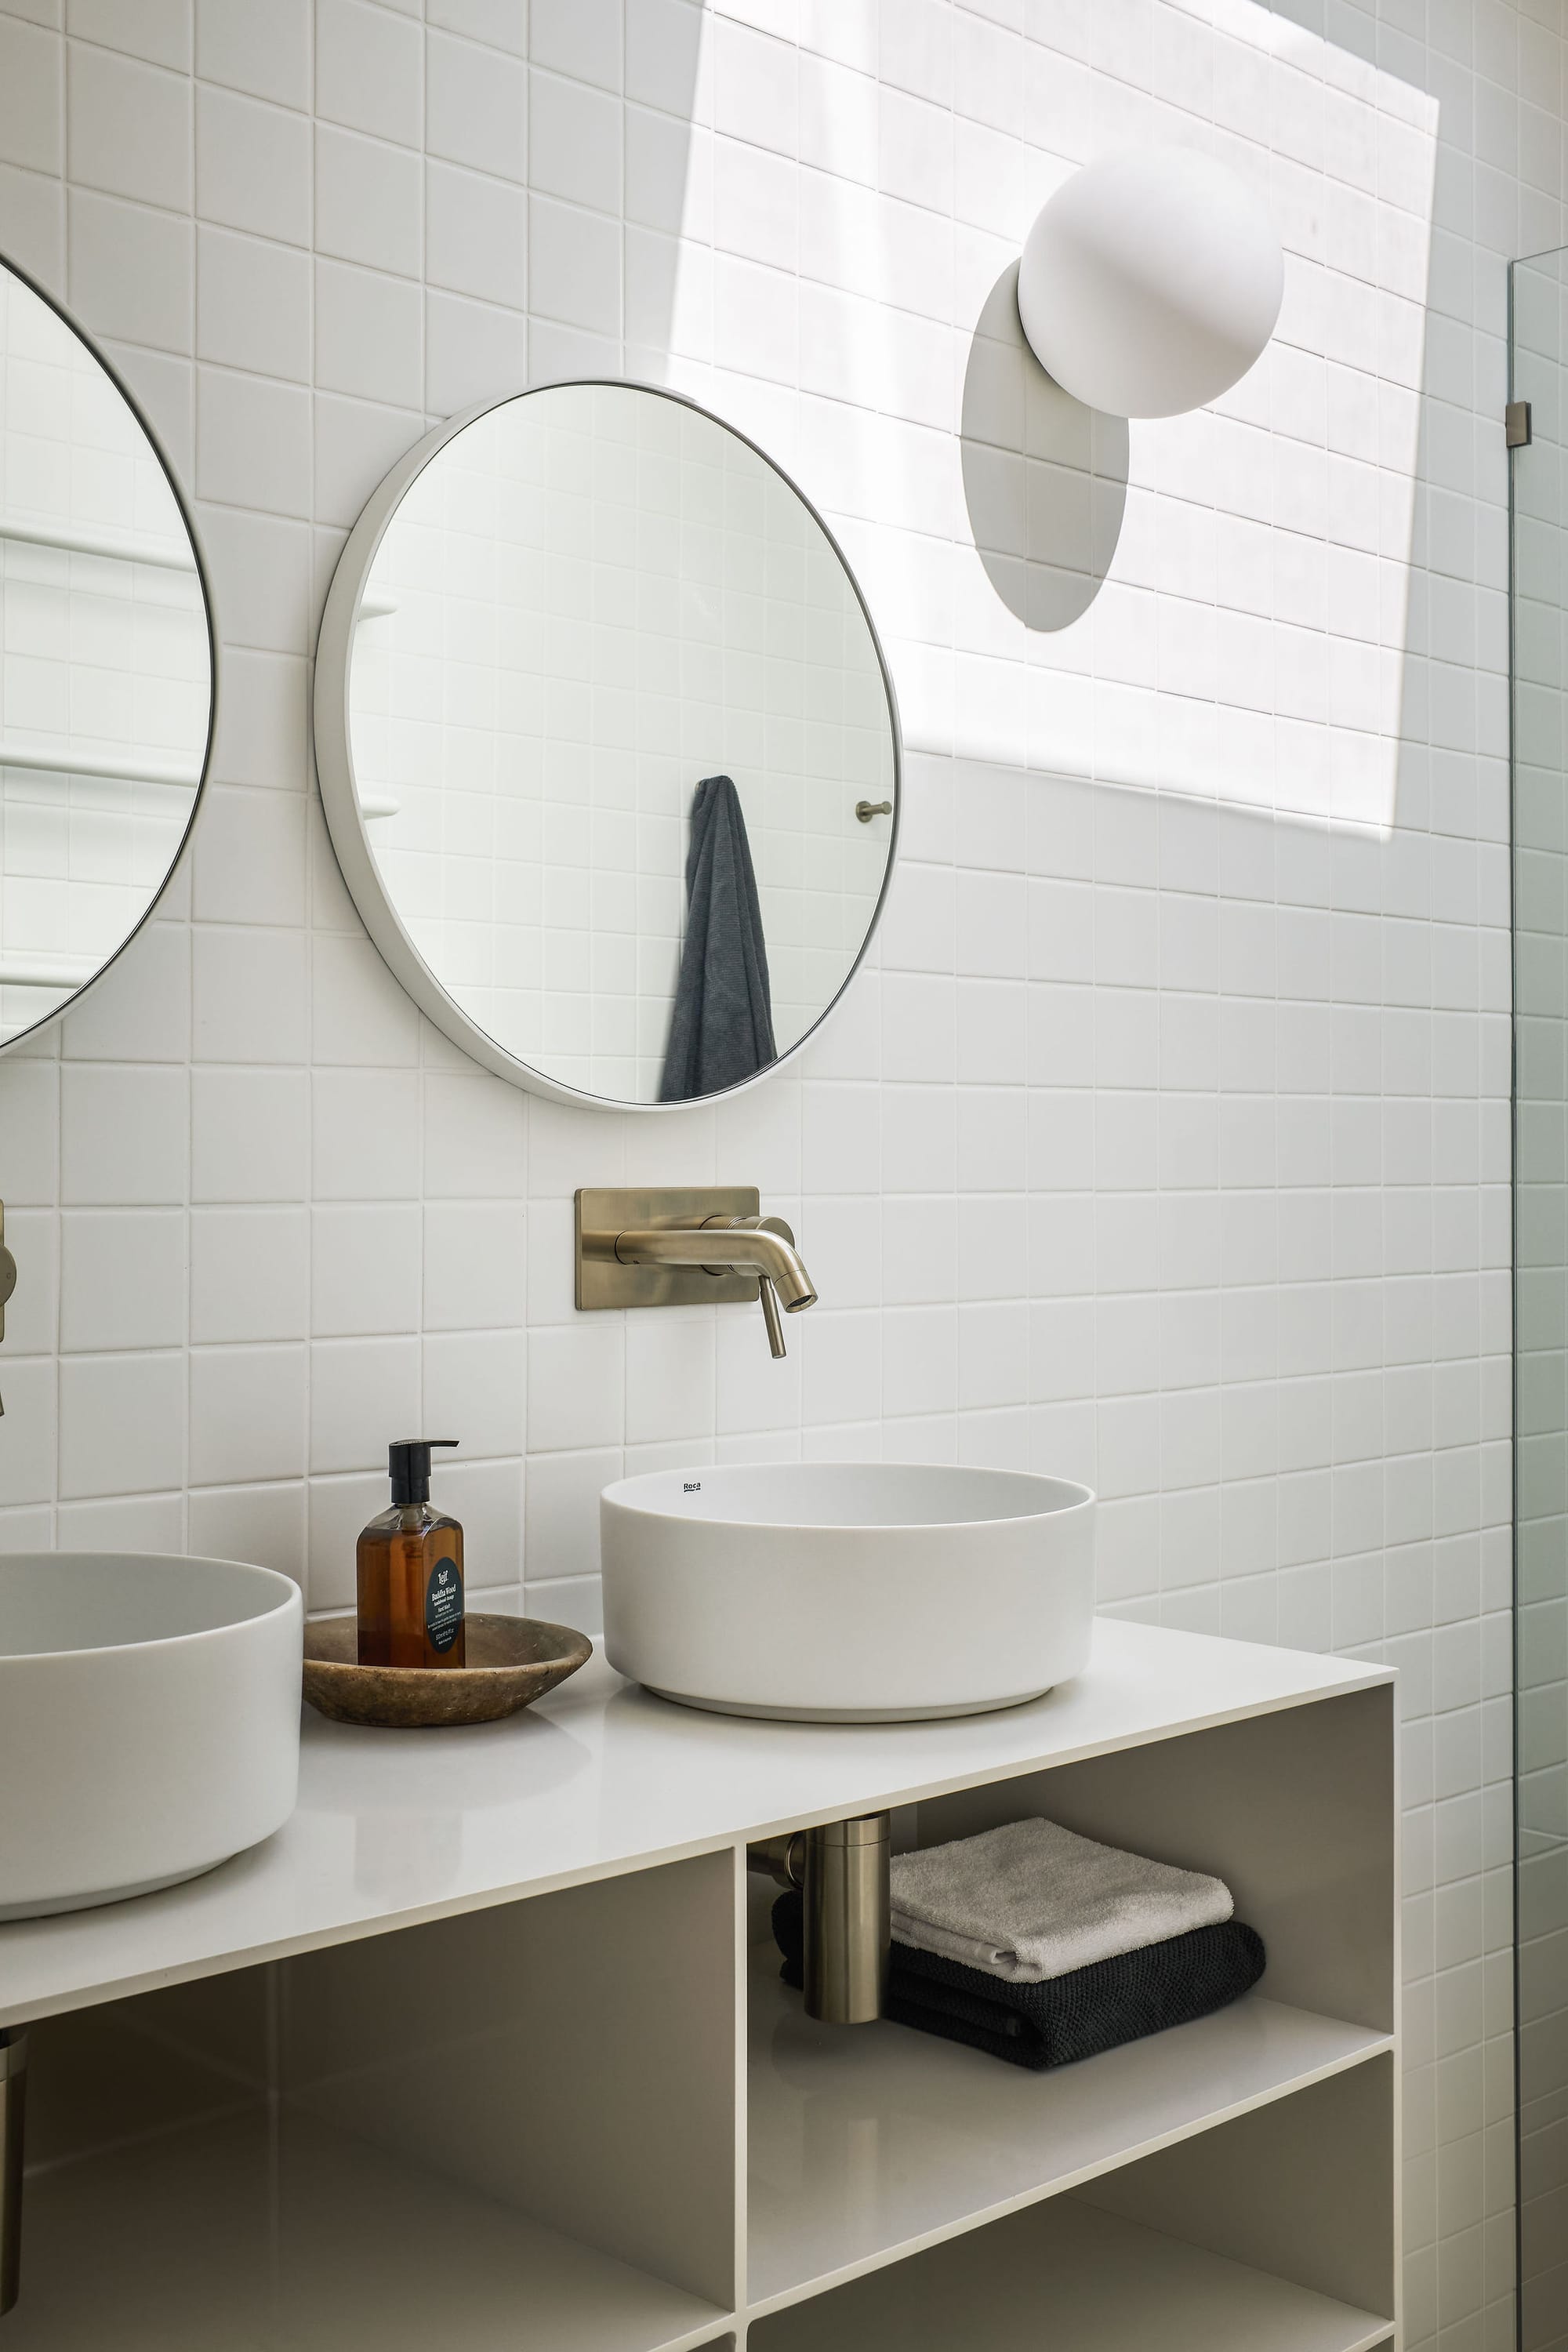 Rockpool Farm Byron Bay. Photography by Andy Macpherson. White tiled bathroom wall with white vanity. Open faced storage and round matching sinks. Round wall hung mirrors.